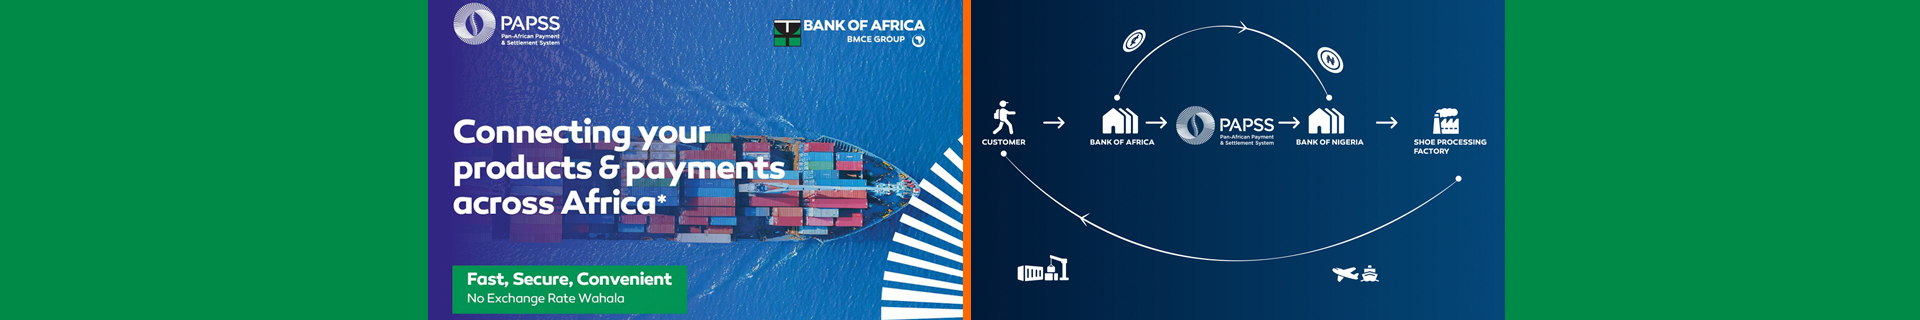 BANK OF AFRICA – GHANA adhère au PAPSS (PAN-AFRICAN PAYMENT AND SETTLEMENT SYSTEM)